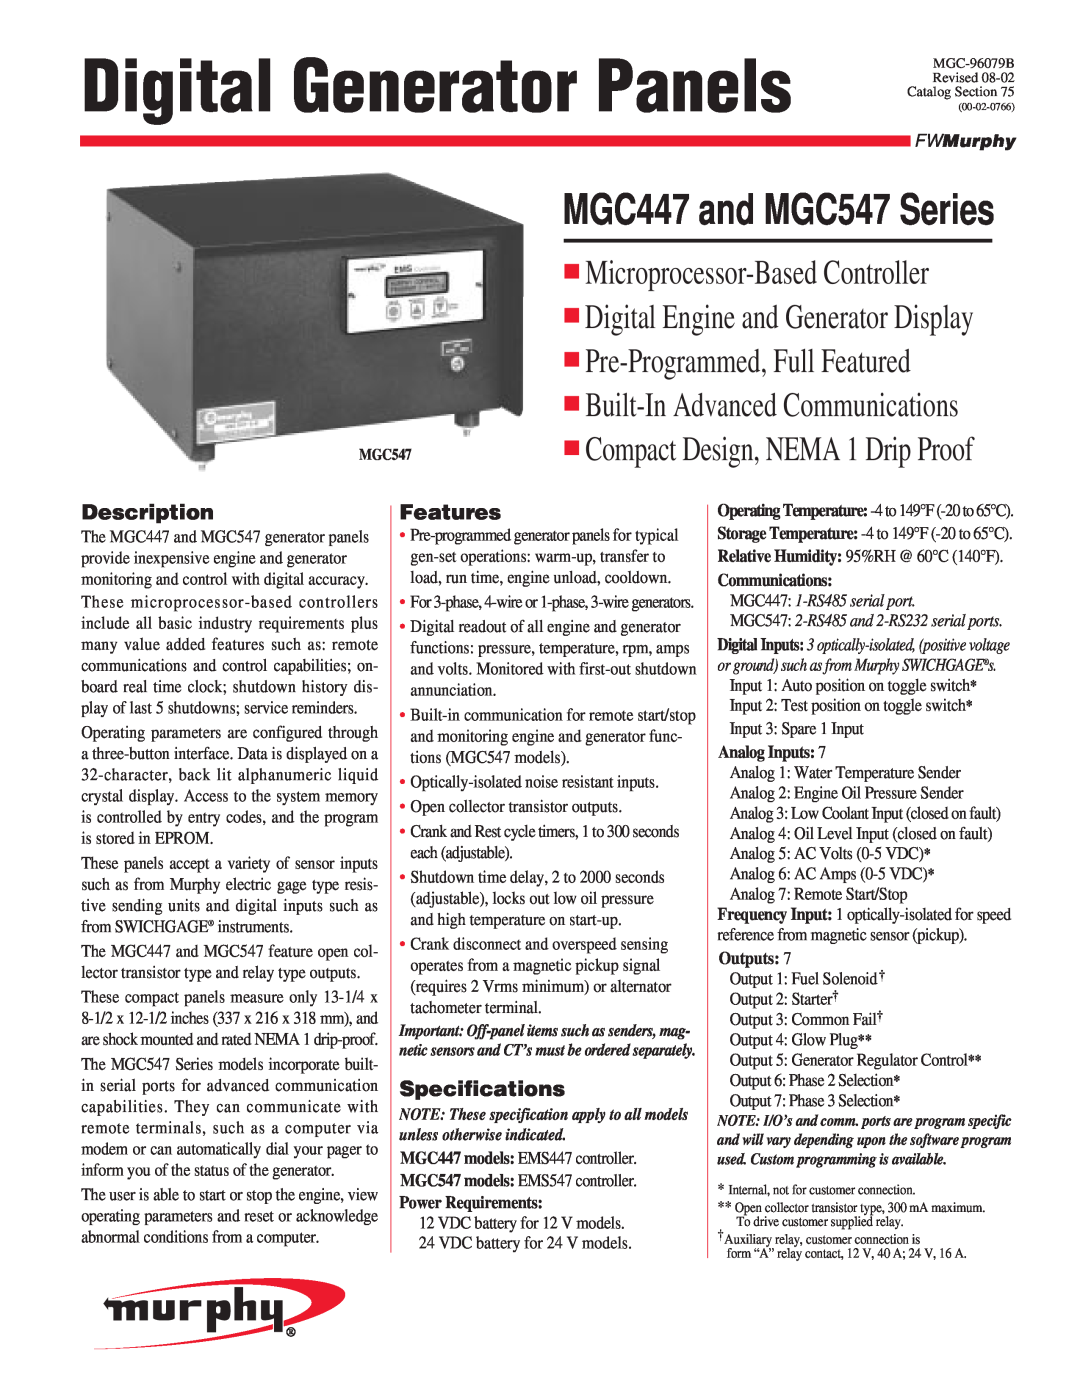 Murphy specifications Digital Generator Panels, Pre-Programmed,Full Featured, MGC447 and MGC547 Series, Description 